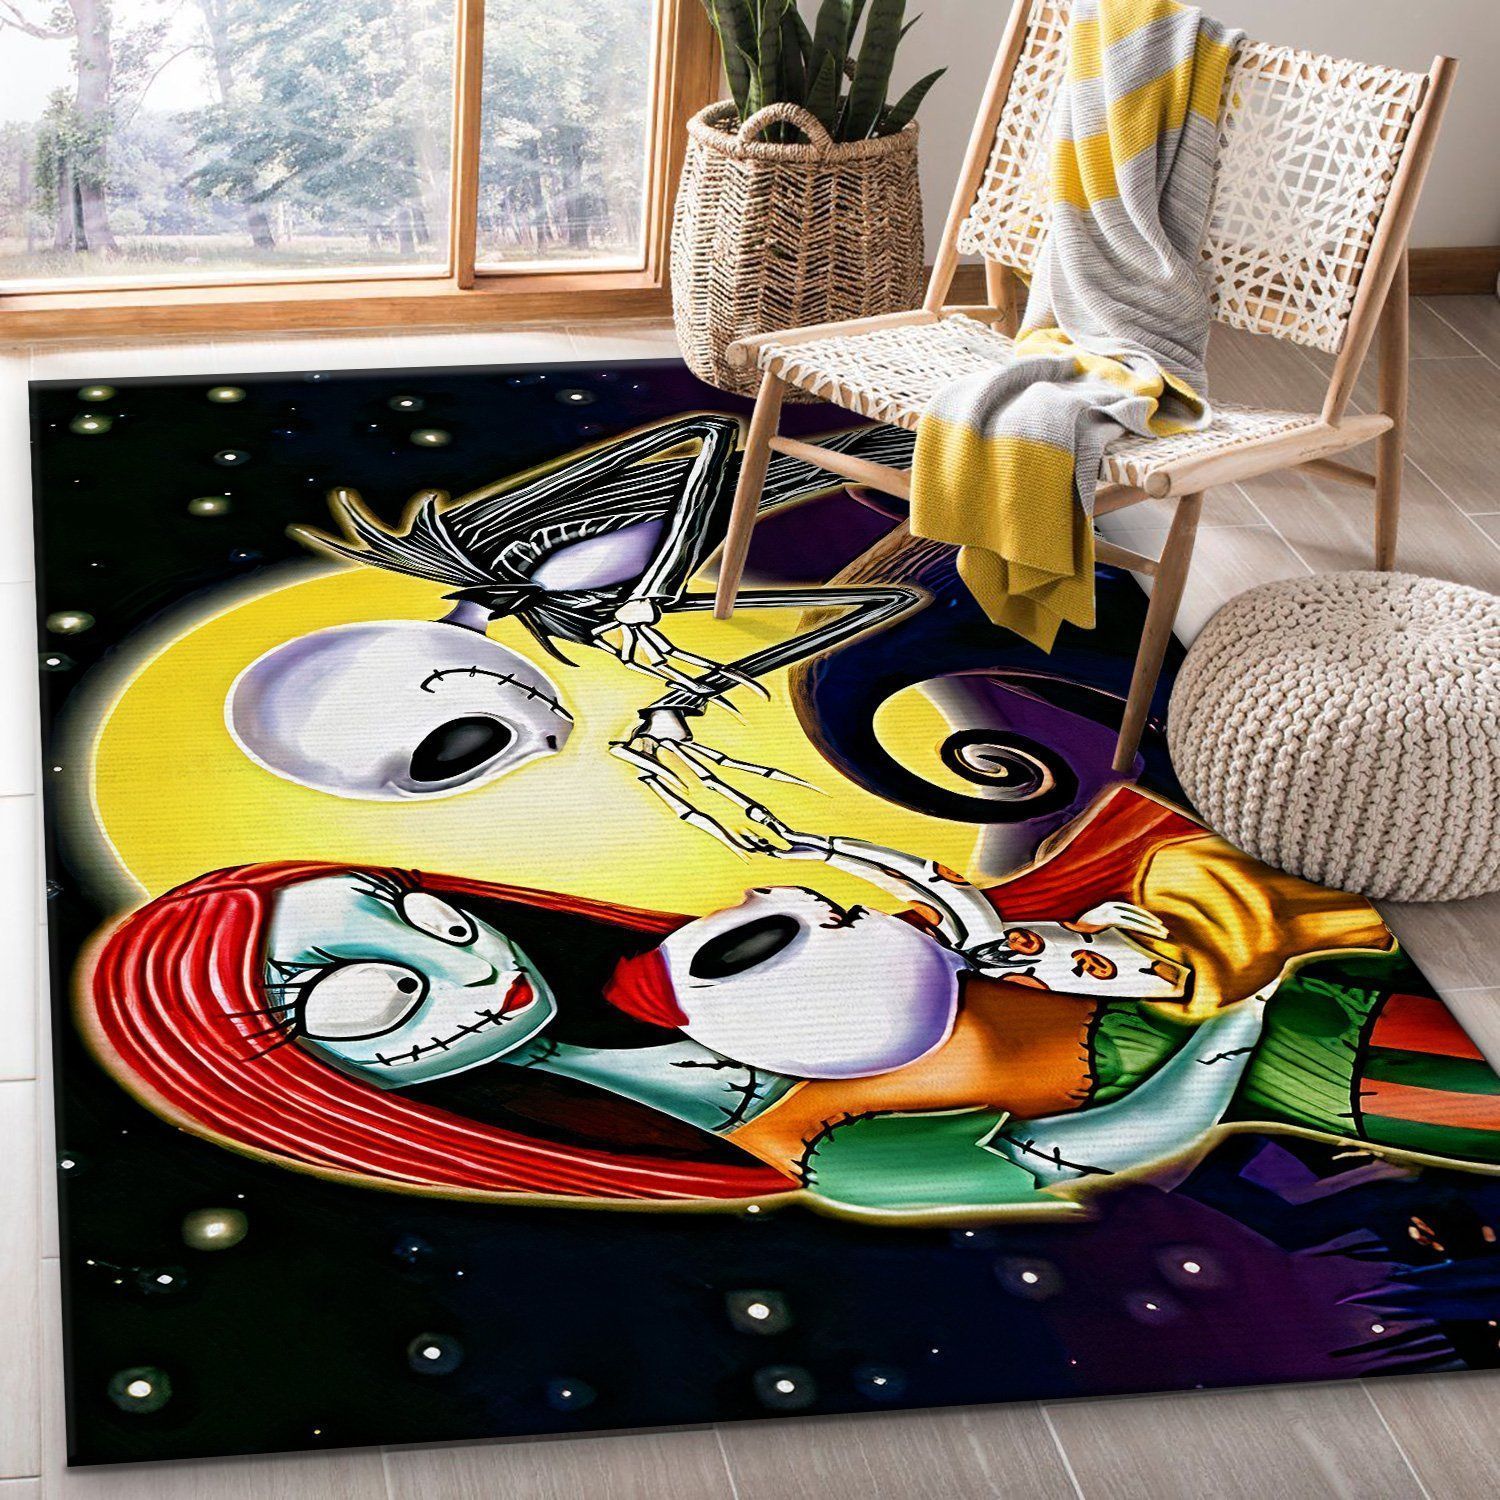 The nightmare before christmas Jack skellington family Area rug The US Decor - Indoor Outdoor Rugs 1